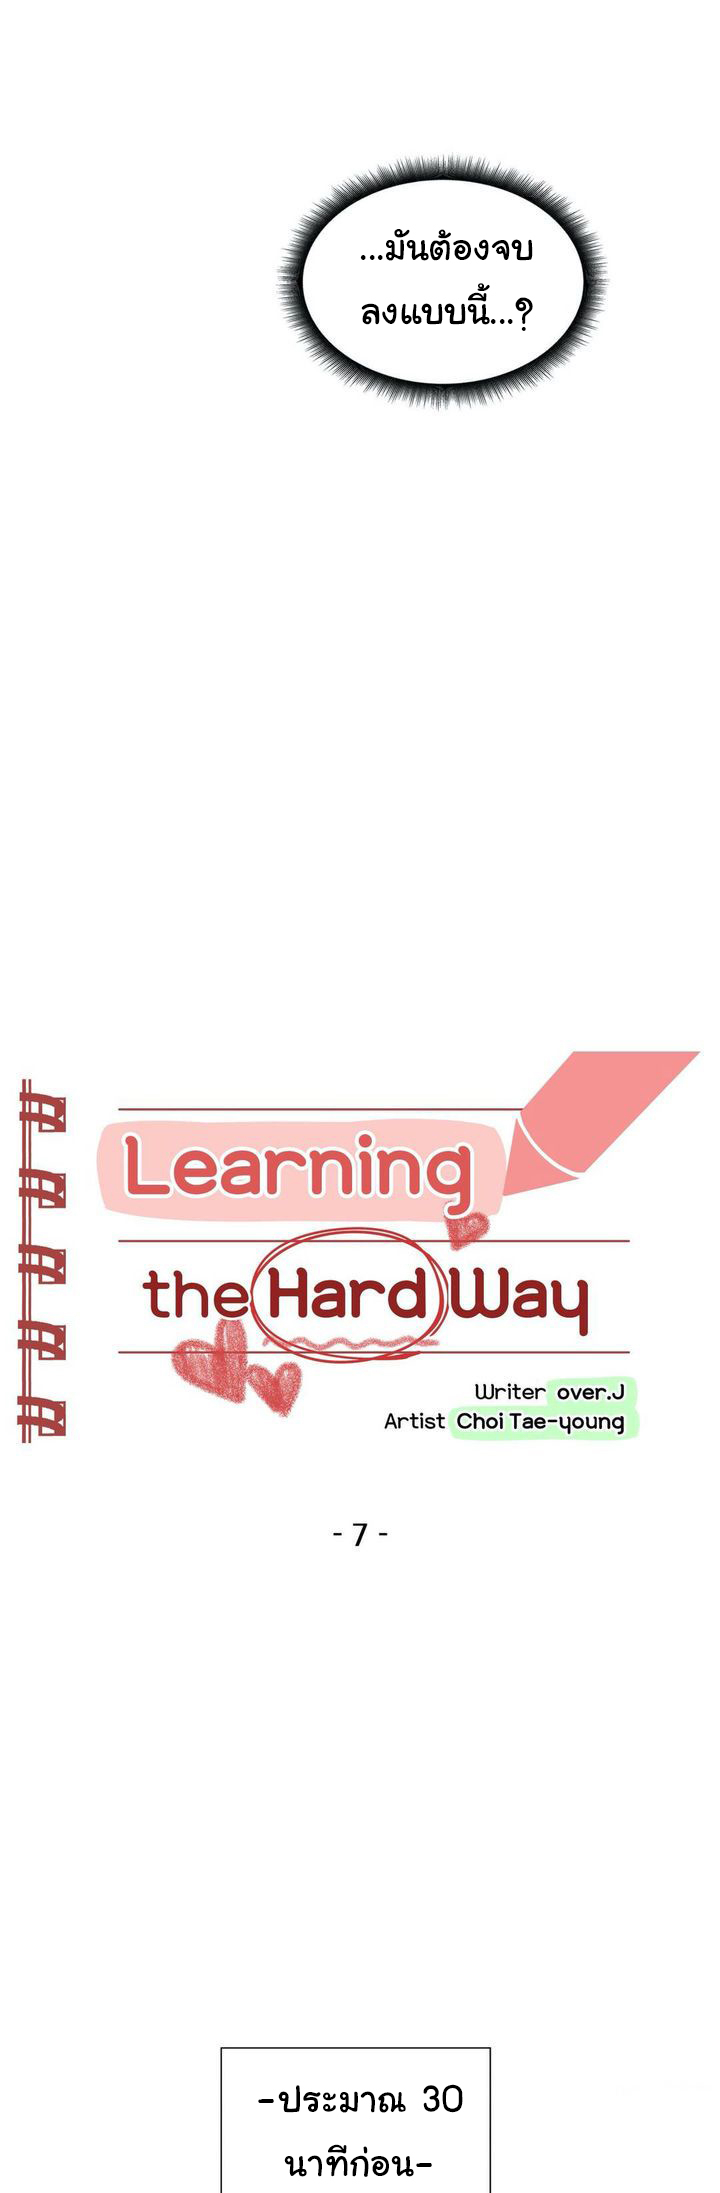 Learning the Hard Way7 (4)